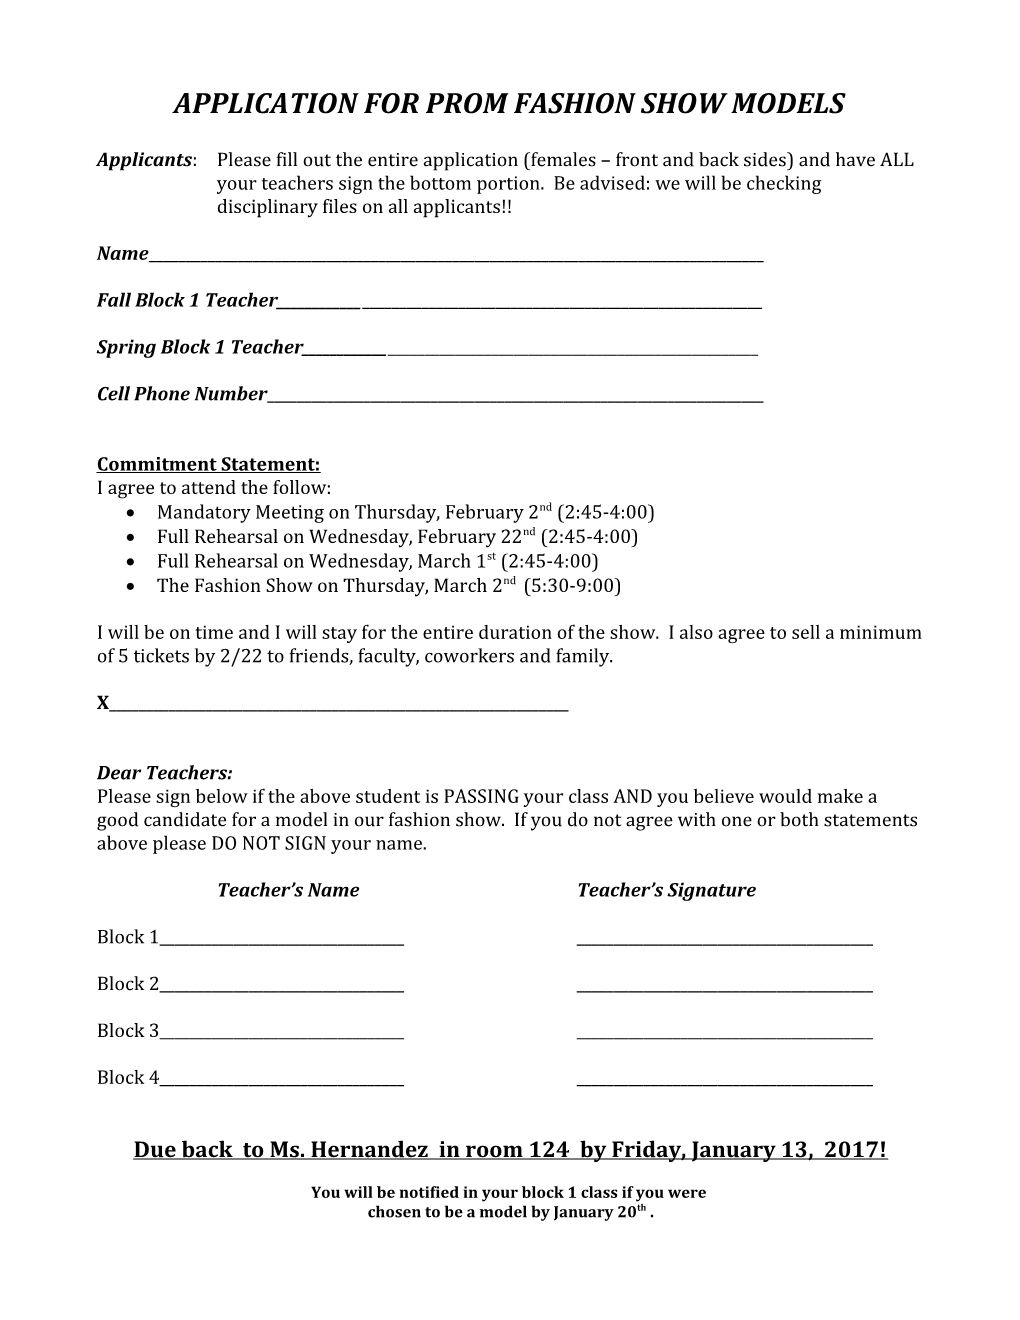 Application for Prom Fashion Show Models